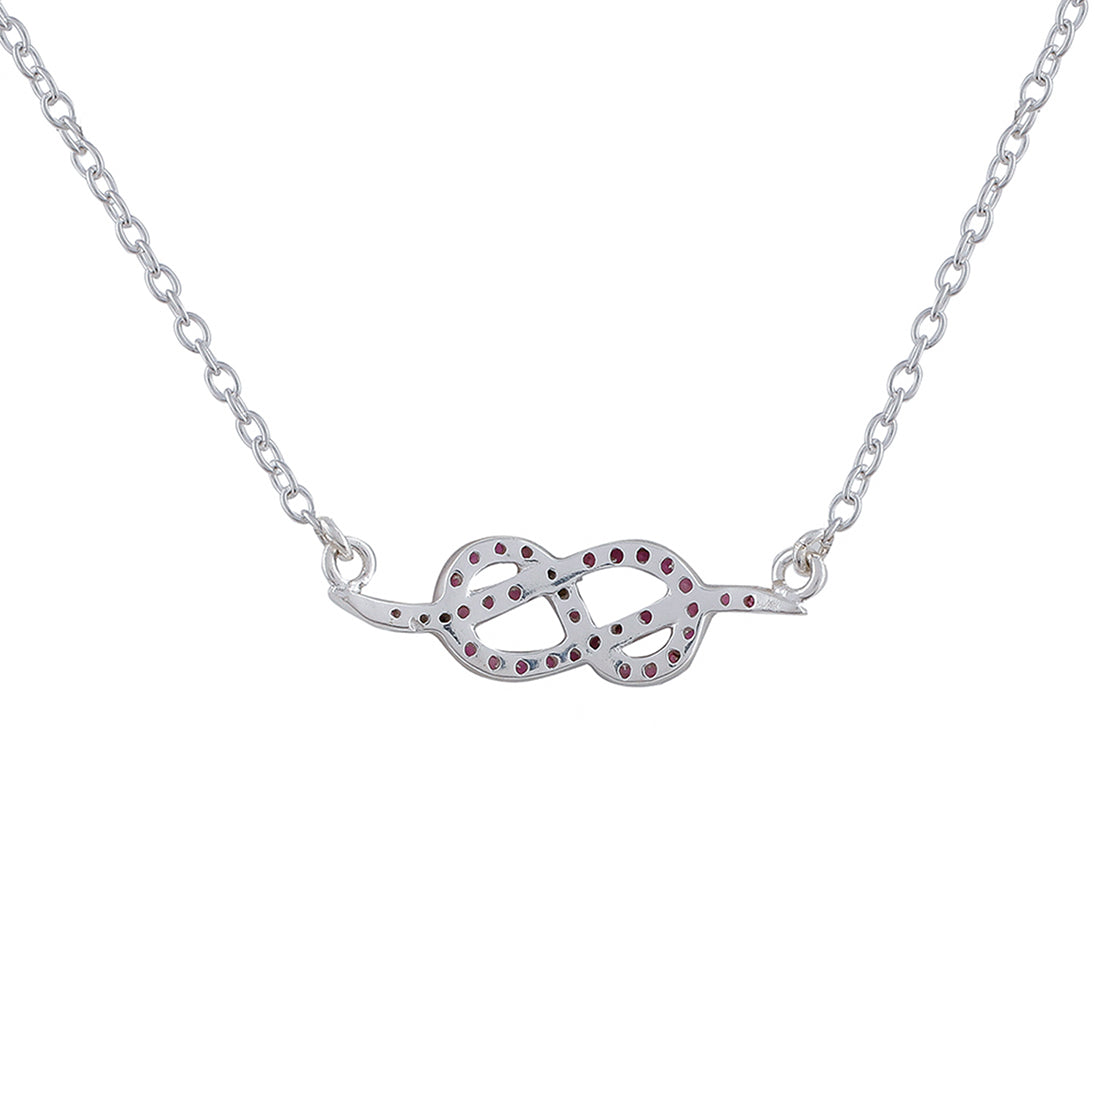 925 Sterling Silver Pink CZ Gem Studded Small Infinity Necklace